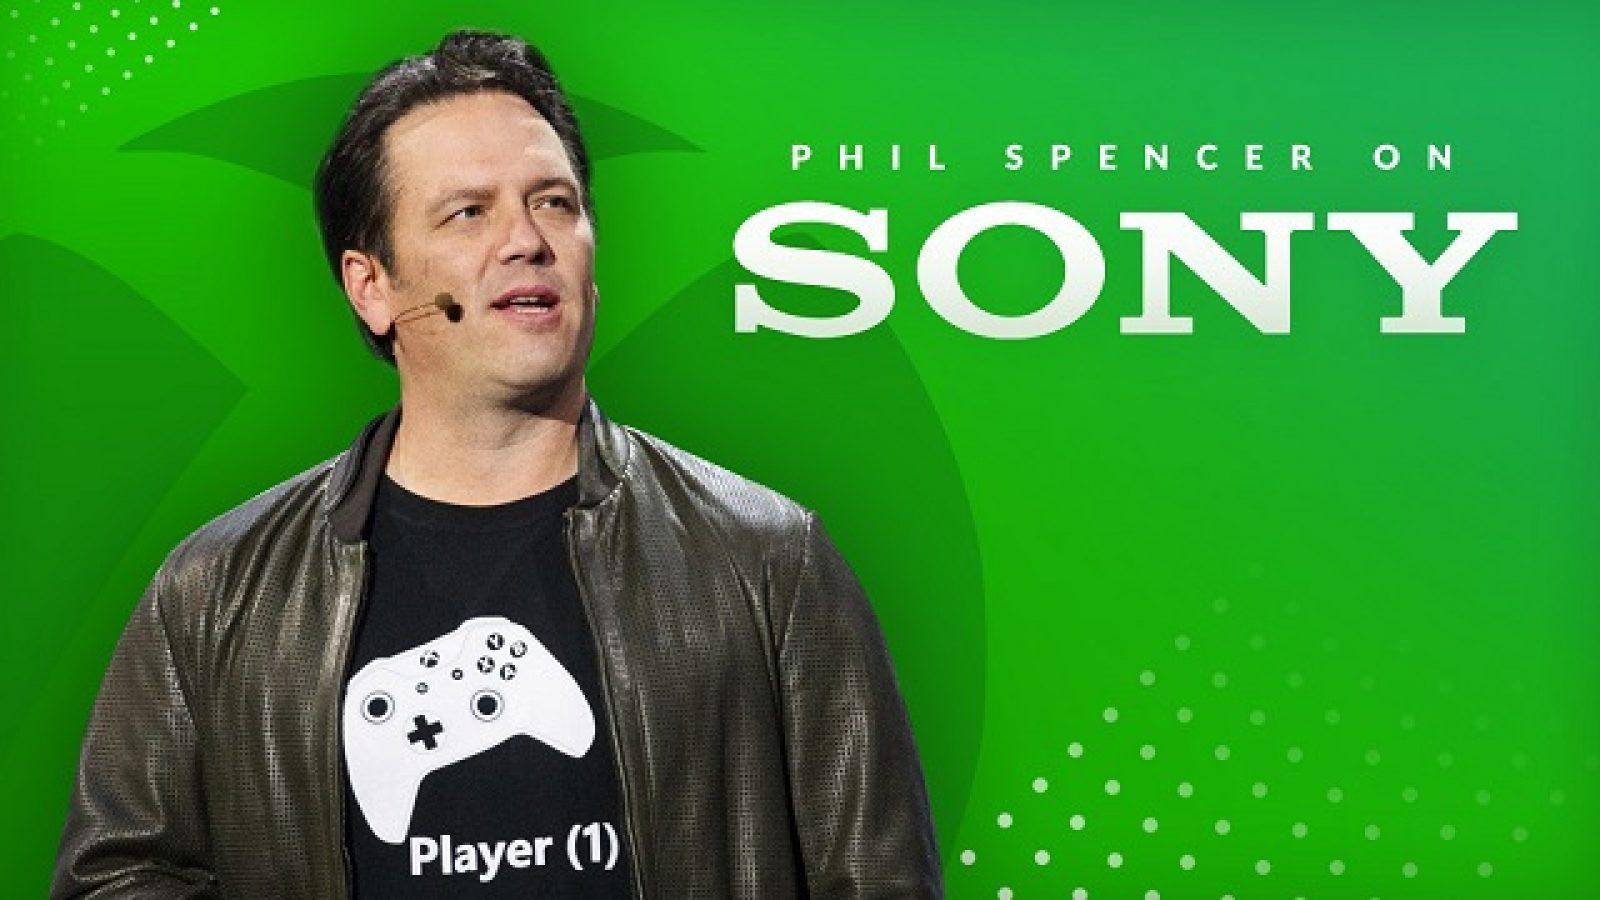 E3 2014 - Podcast Interview With The Head Of Xbox, Phil Spencer on